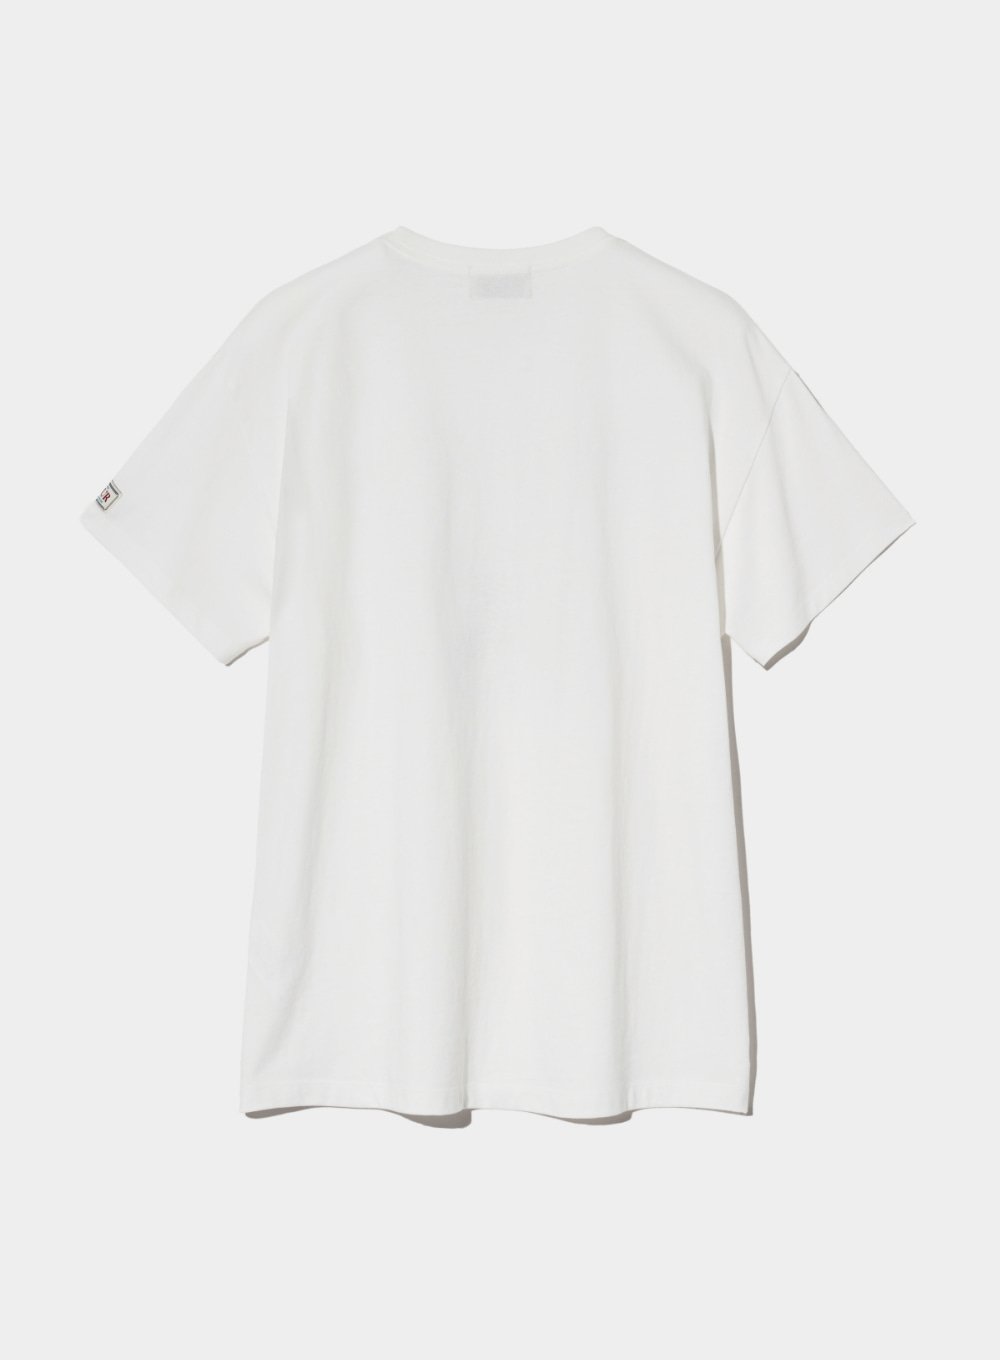 (W) Satur All Day T-Shirt - White Blue